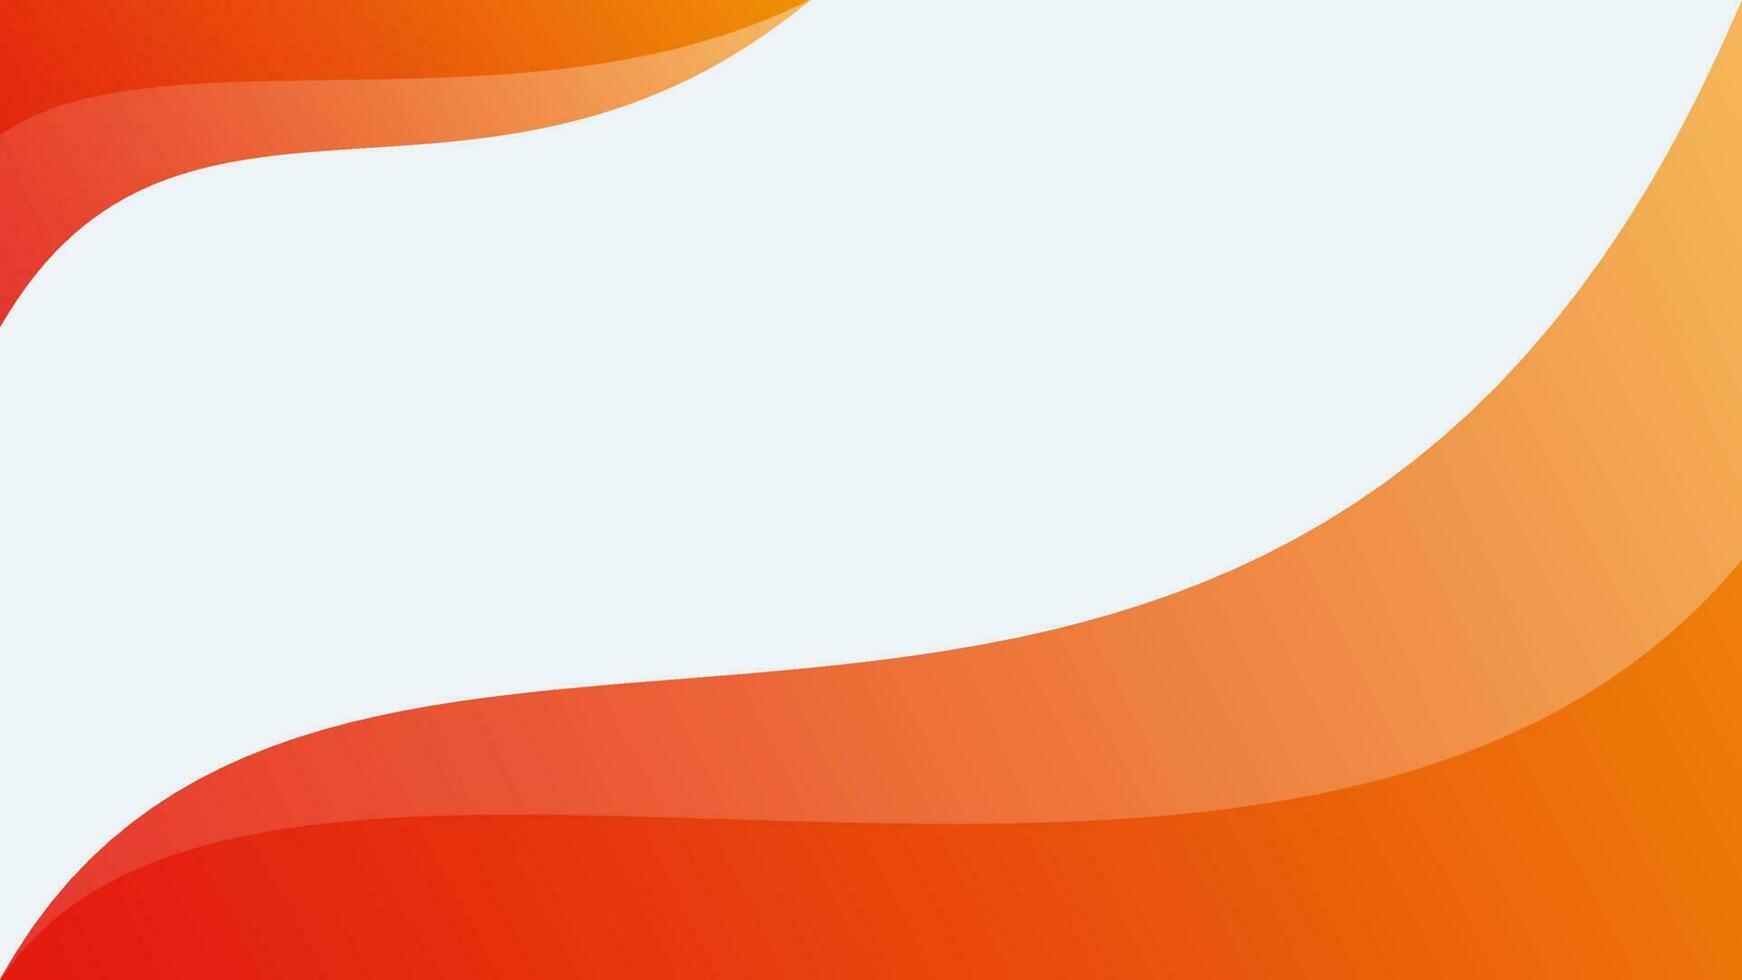 background design vector with orange color suitable for 4k resolution